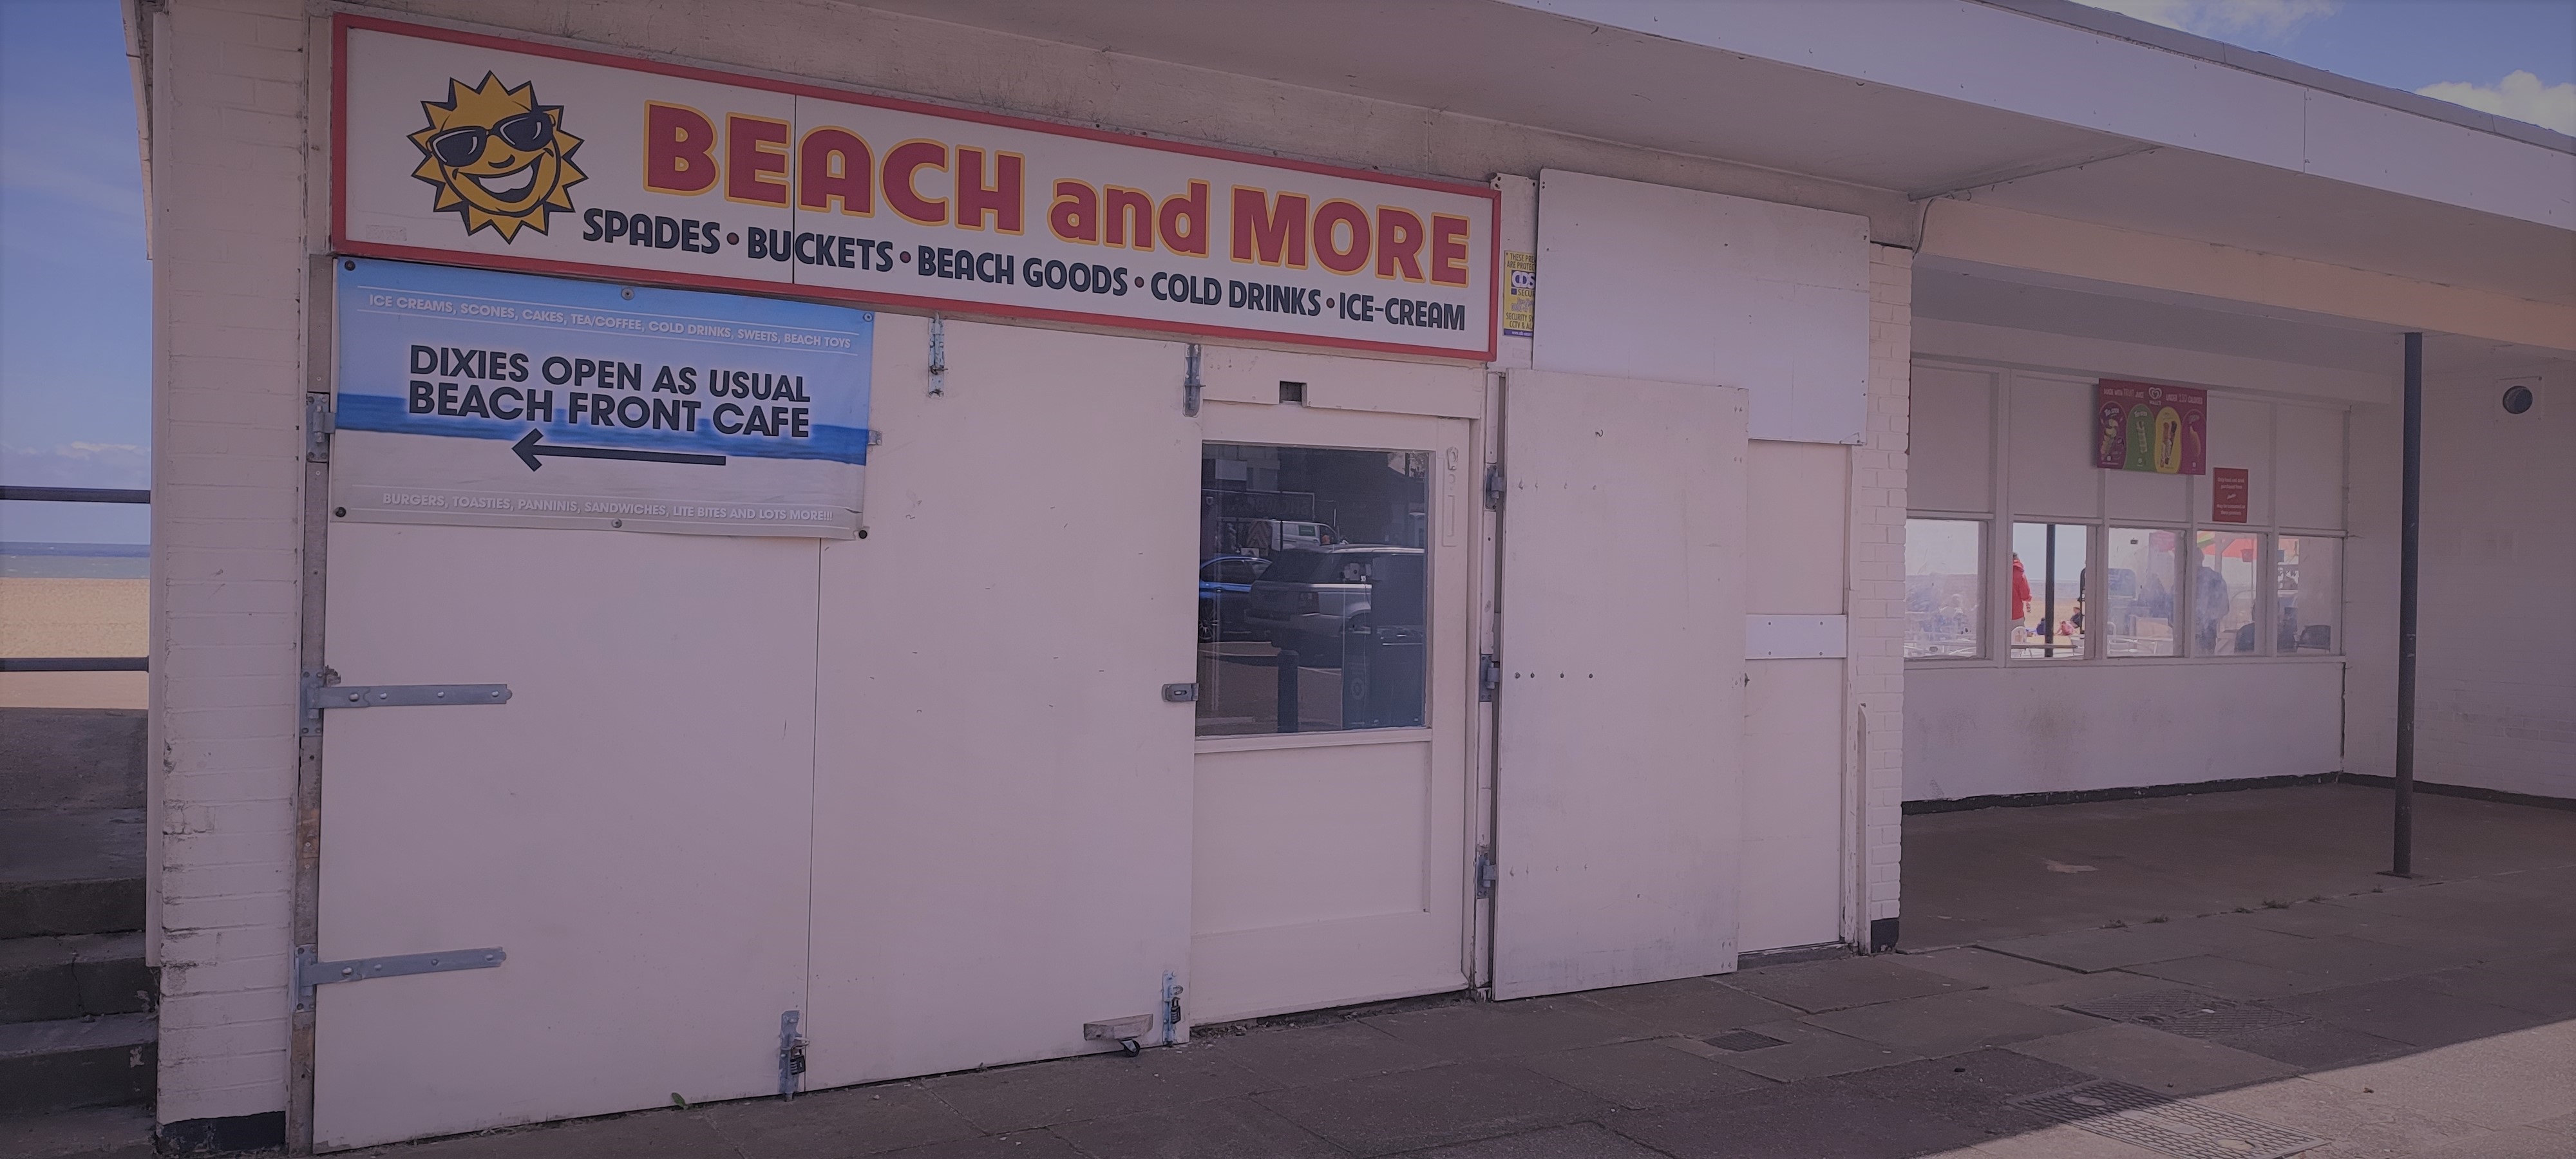 Abandoned beach shop on Great Yarmouth's seafront, possibly haunted by a spooky clown dripping with bloodied ice cream.